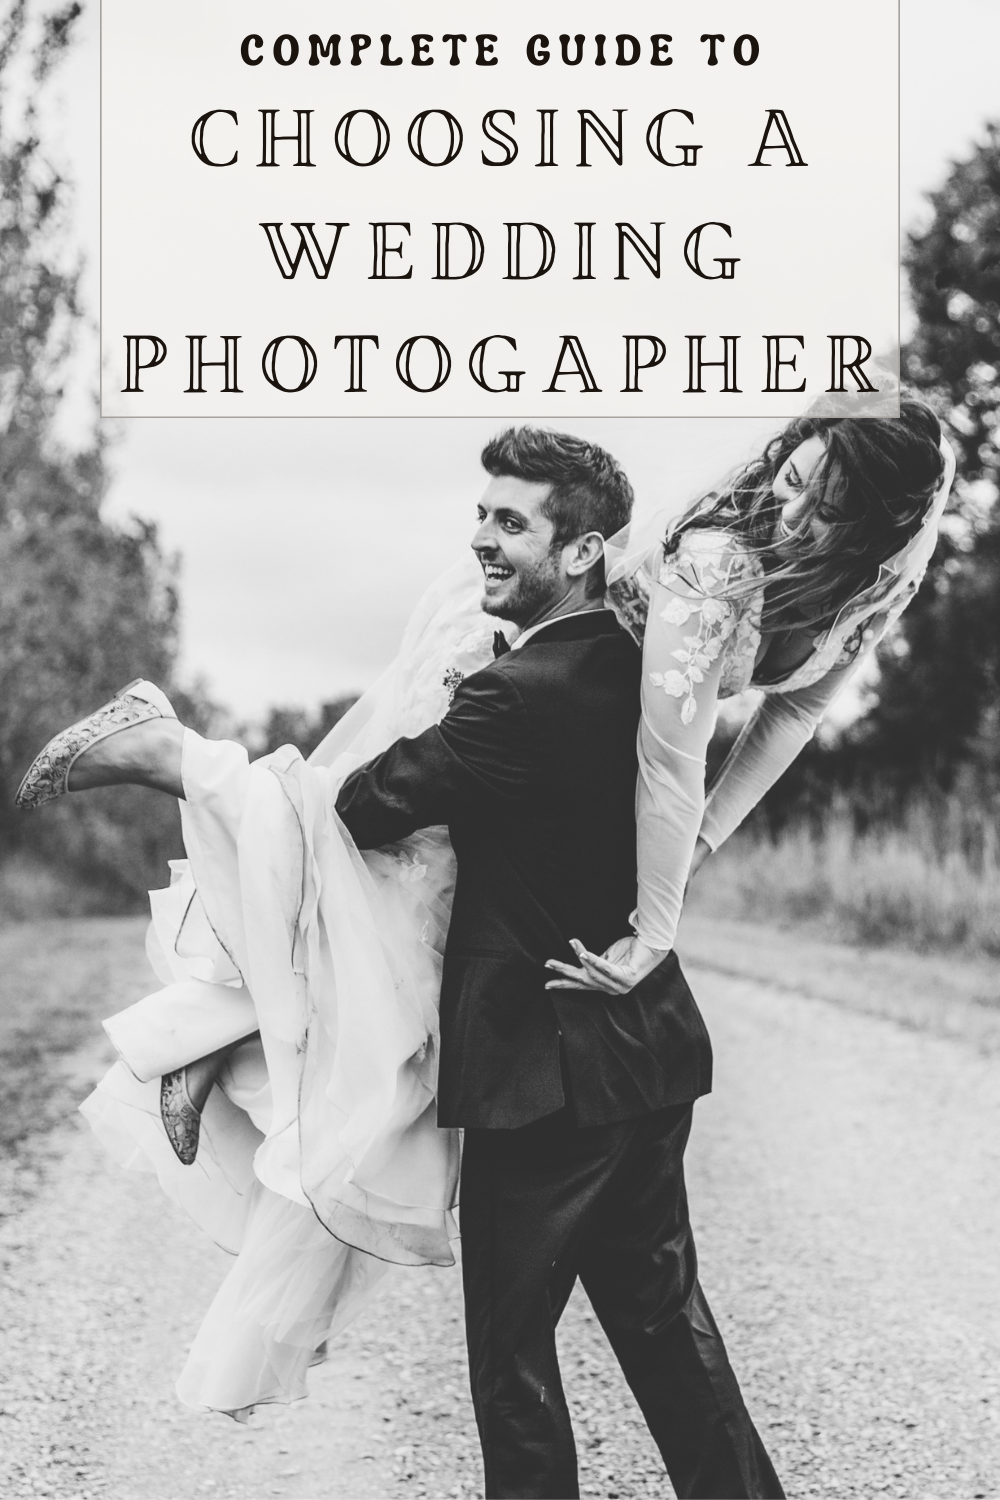 complete guide to choosing a wedding photographer where groom has picked up bride